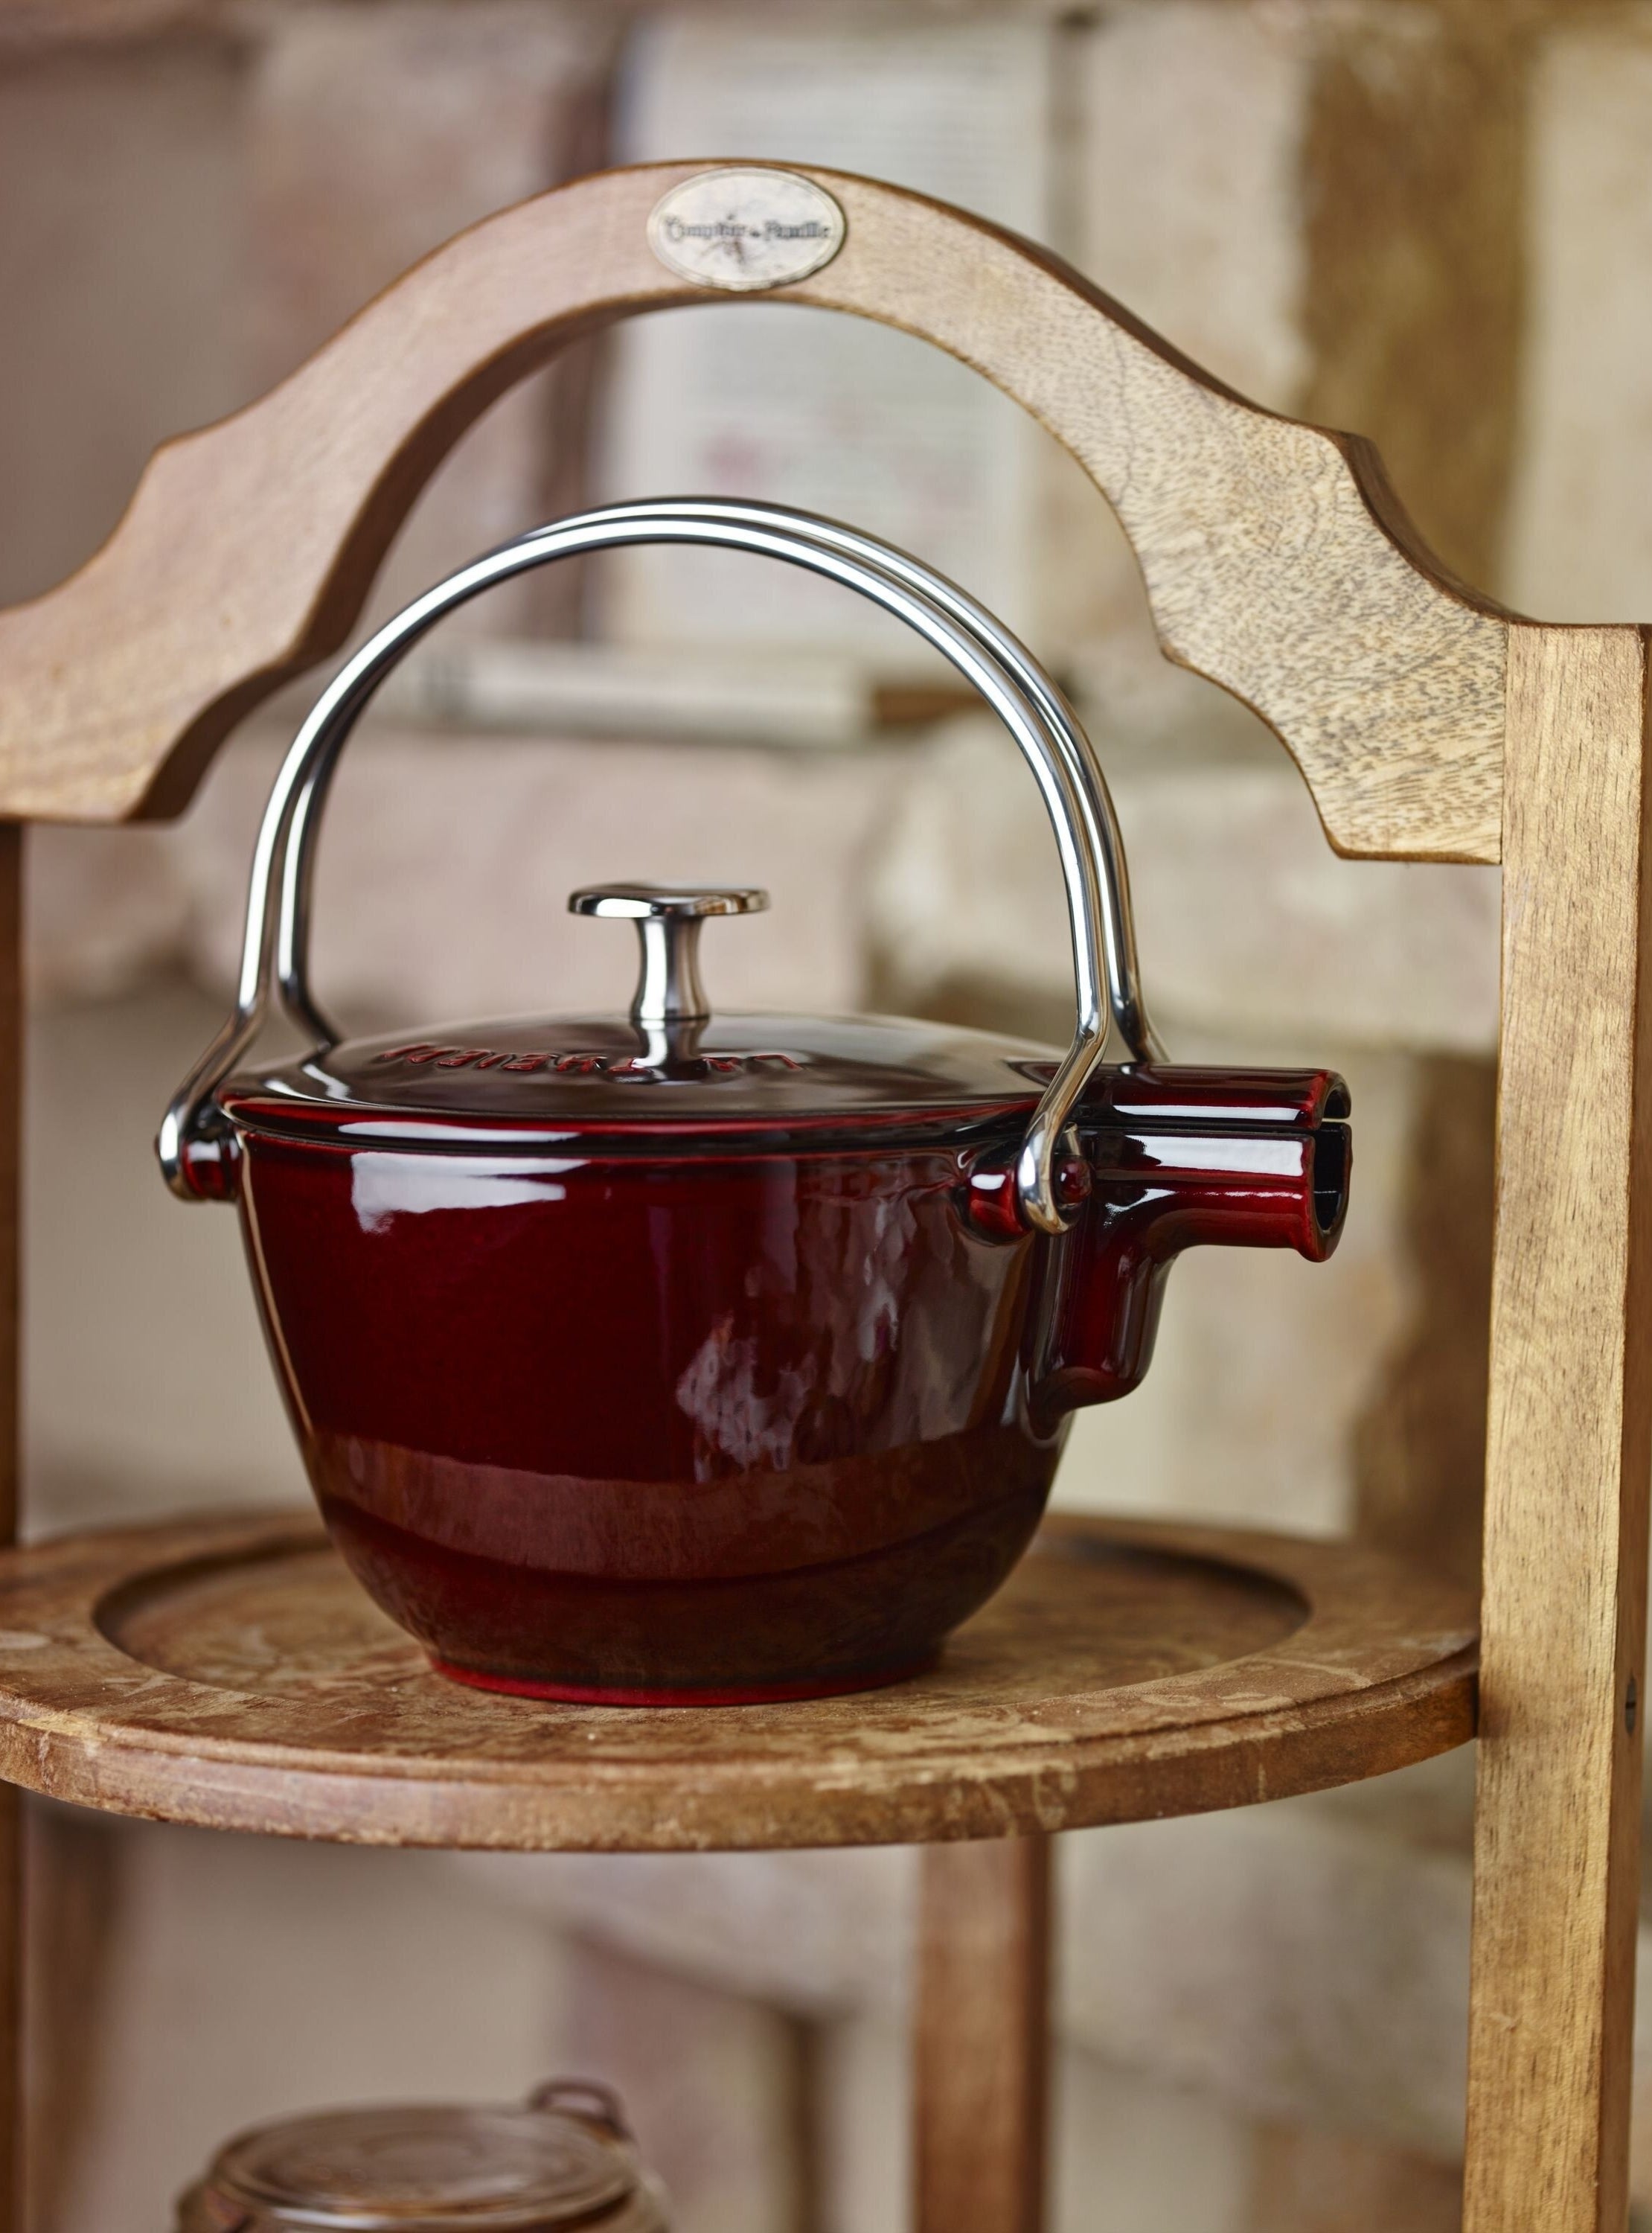 the cast-iron kettle with a handle